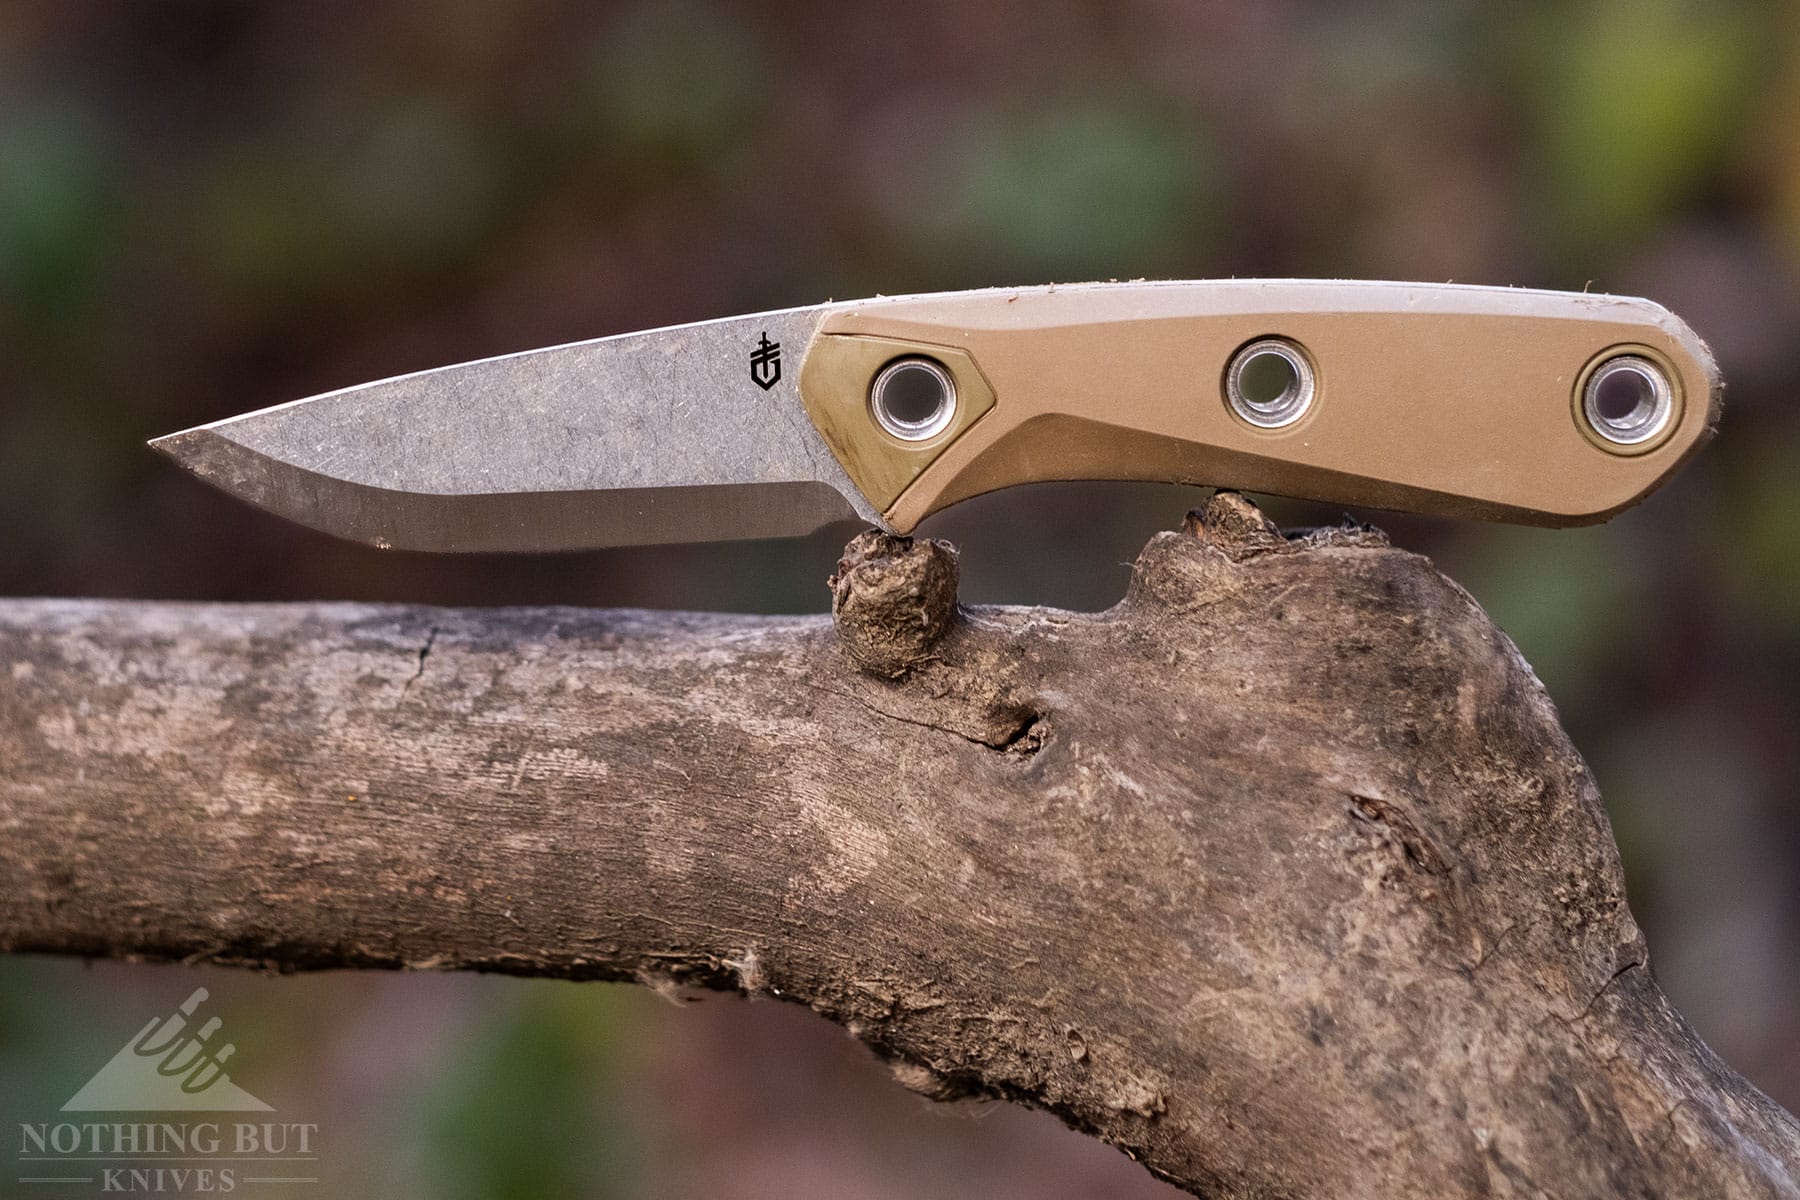 The Princple handled the bushcraft tasks we threw at it over the course of our review well, and it has solidified itself as a go-to option for anyone looking for a budget price, compact bushcraft knife.